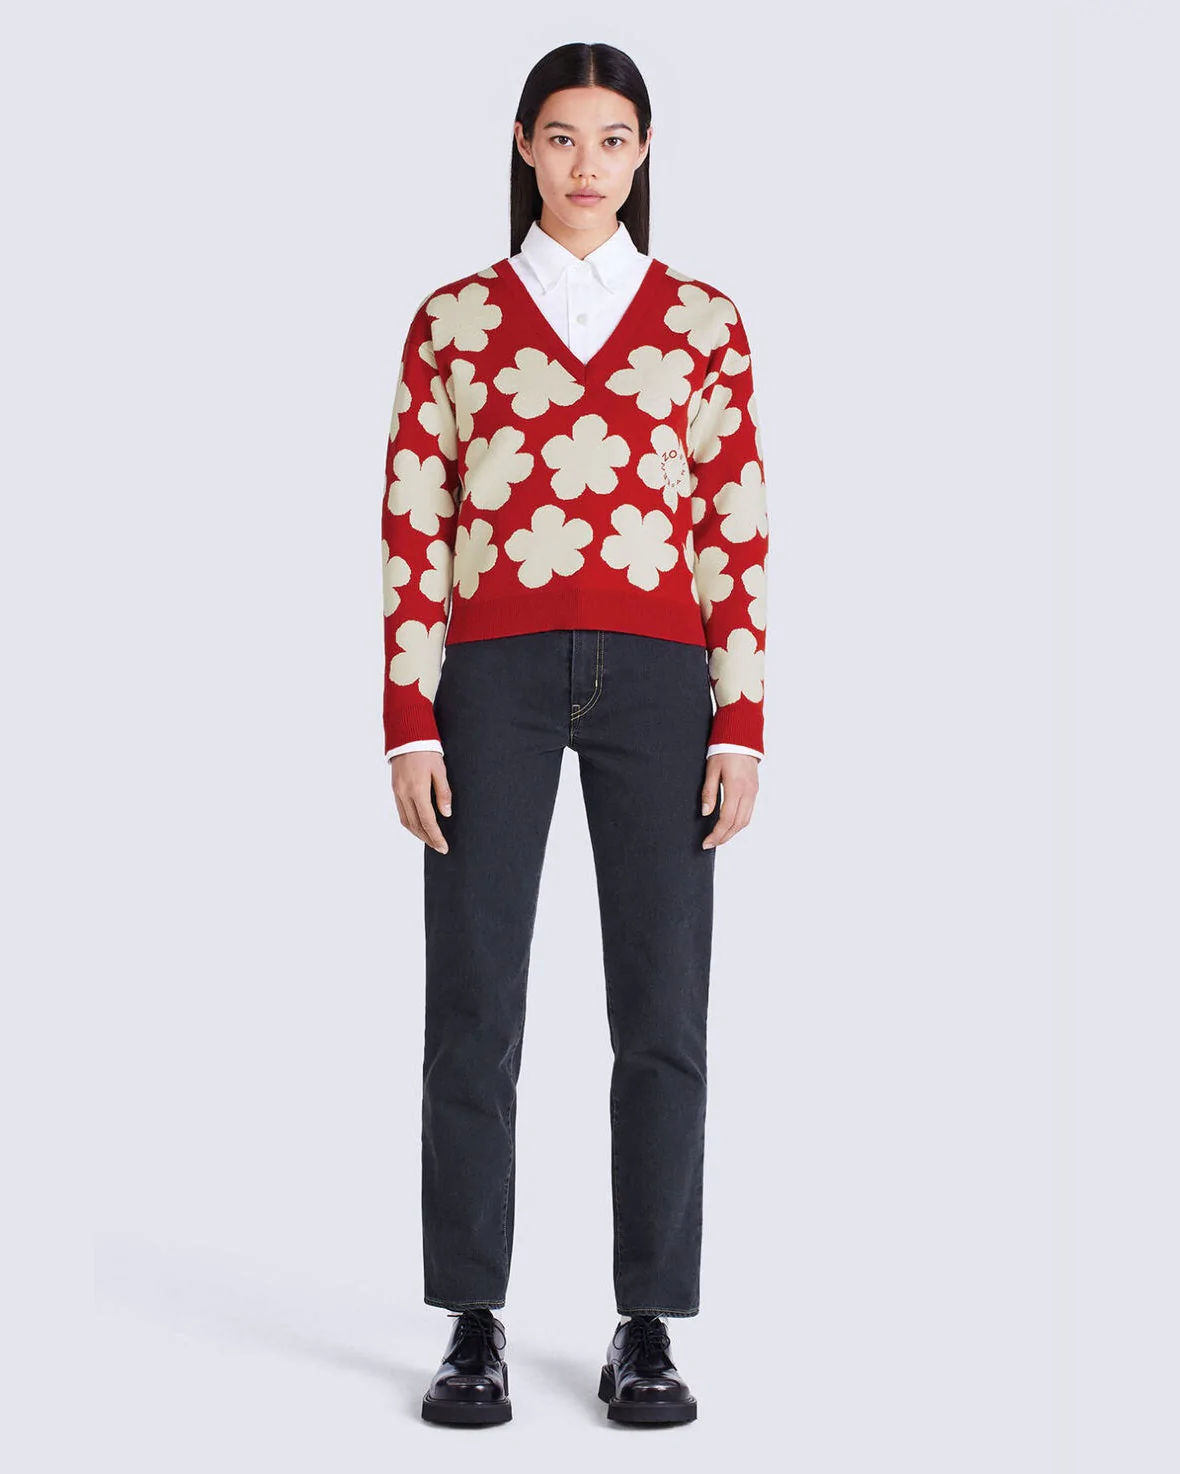 Kenzo Red Floral Wool V-Neck Sweater